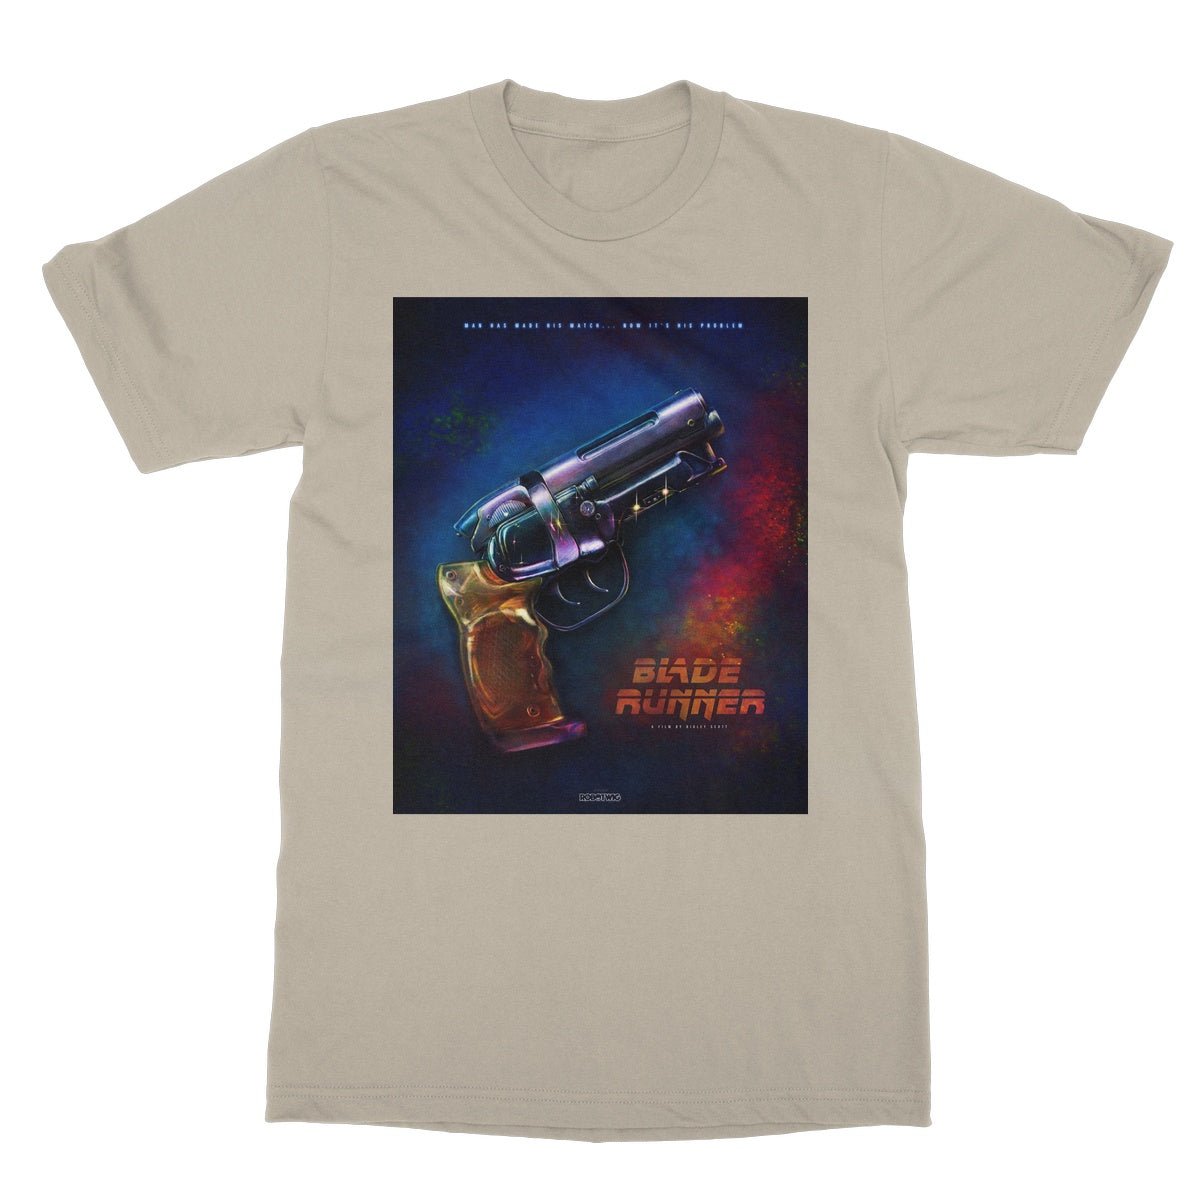 Bladerunner Illustrated Softstyle T-Shirt